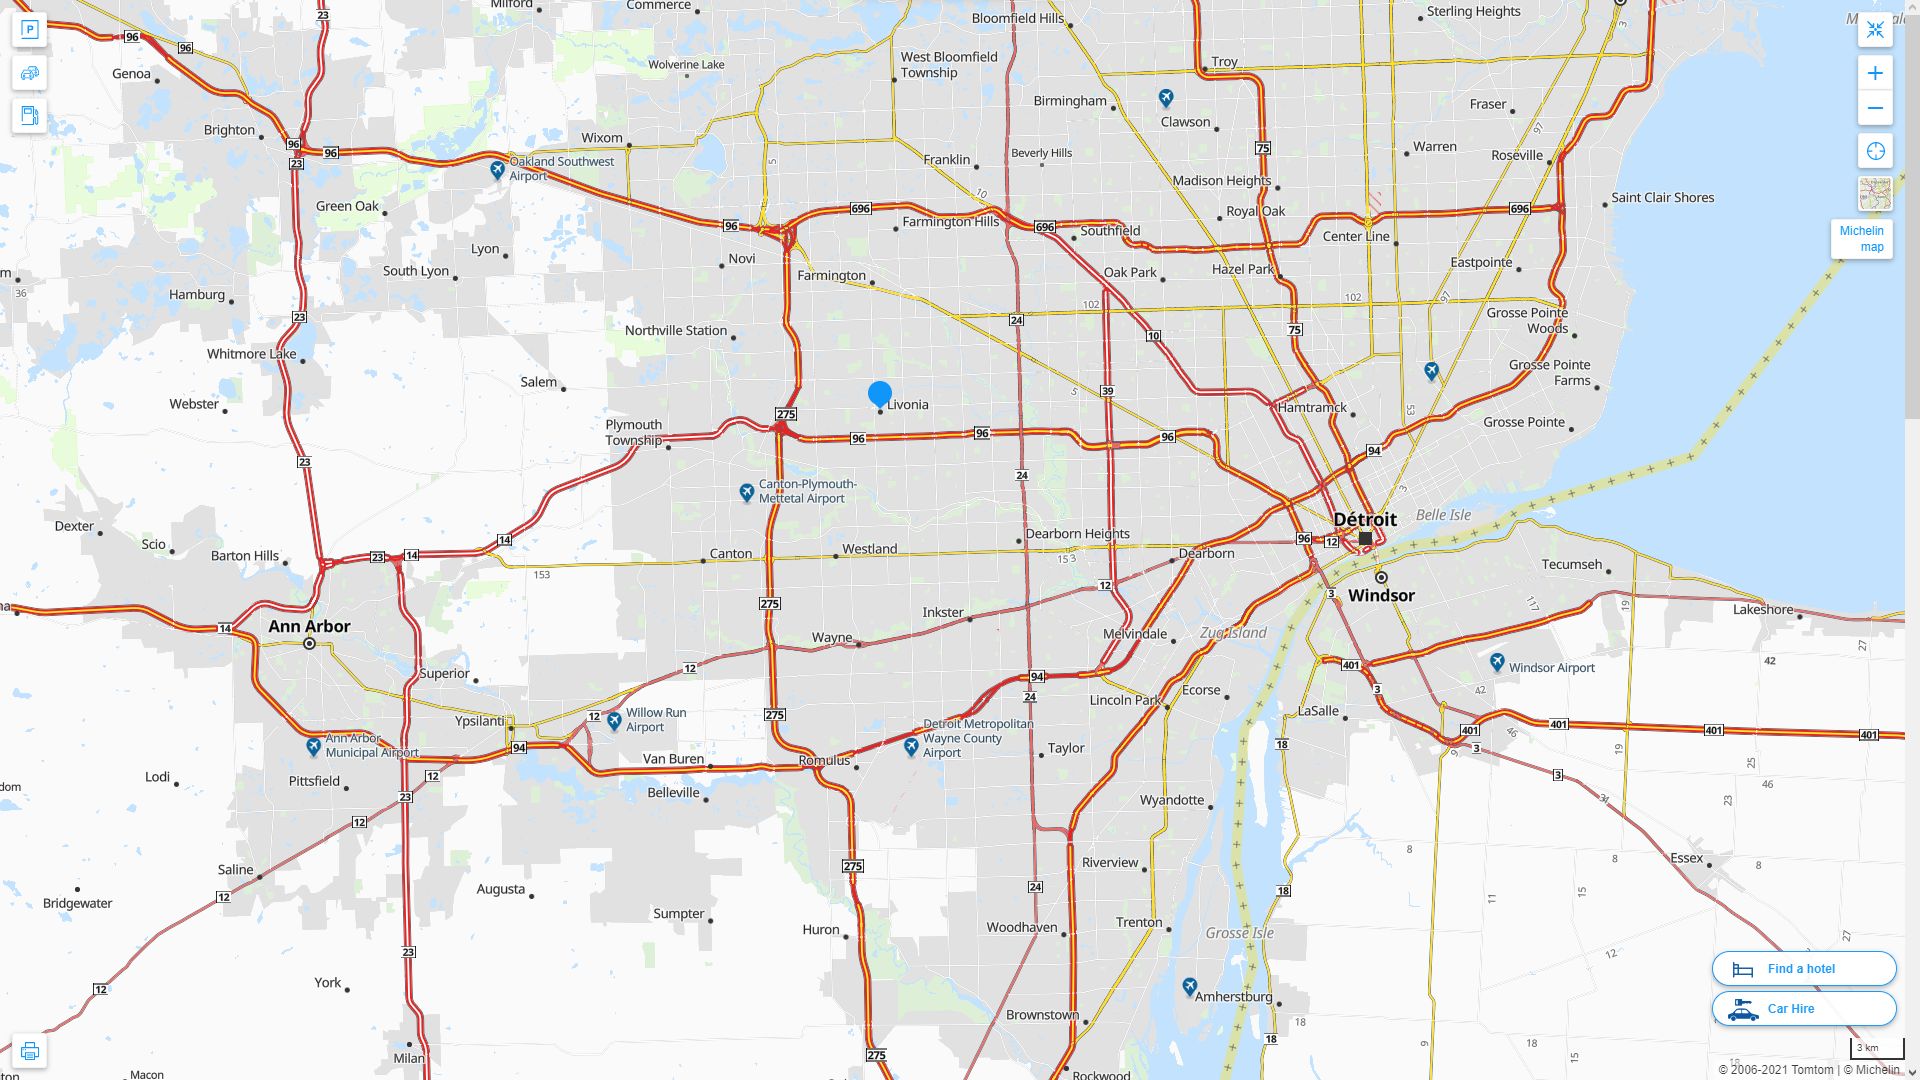 Livonia Michigan Highway and Road Map